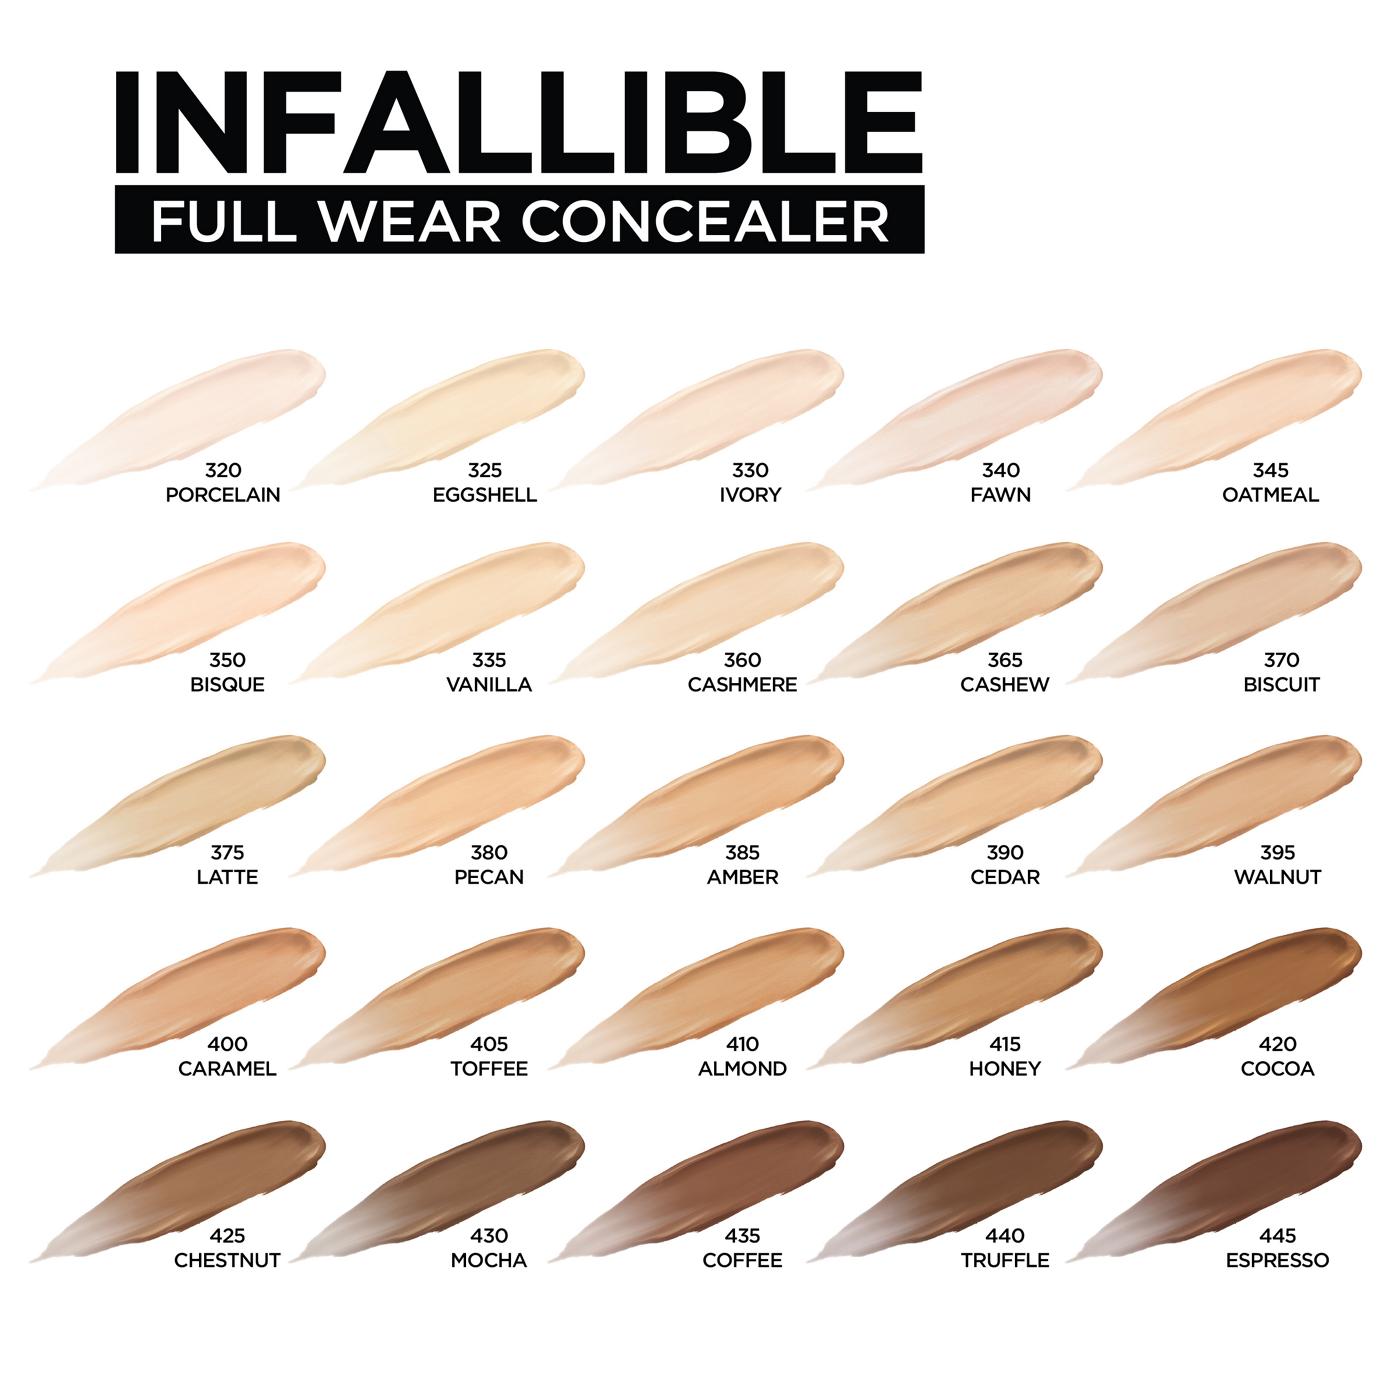 L'Oréal Paris Infallible Full Wear Concealer up to 24H Full Coverage Toffee; image 7 of 8